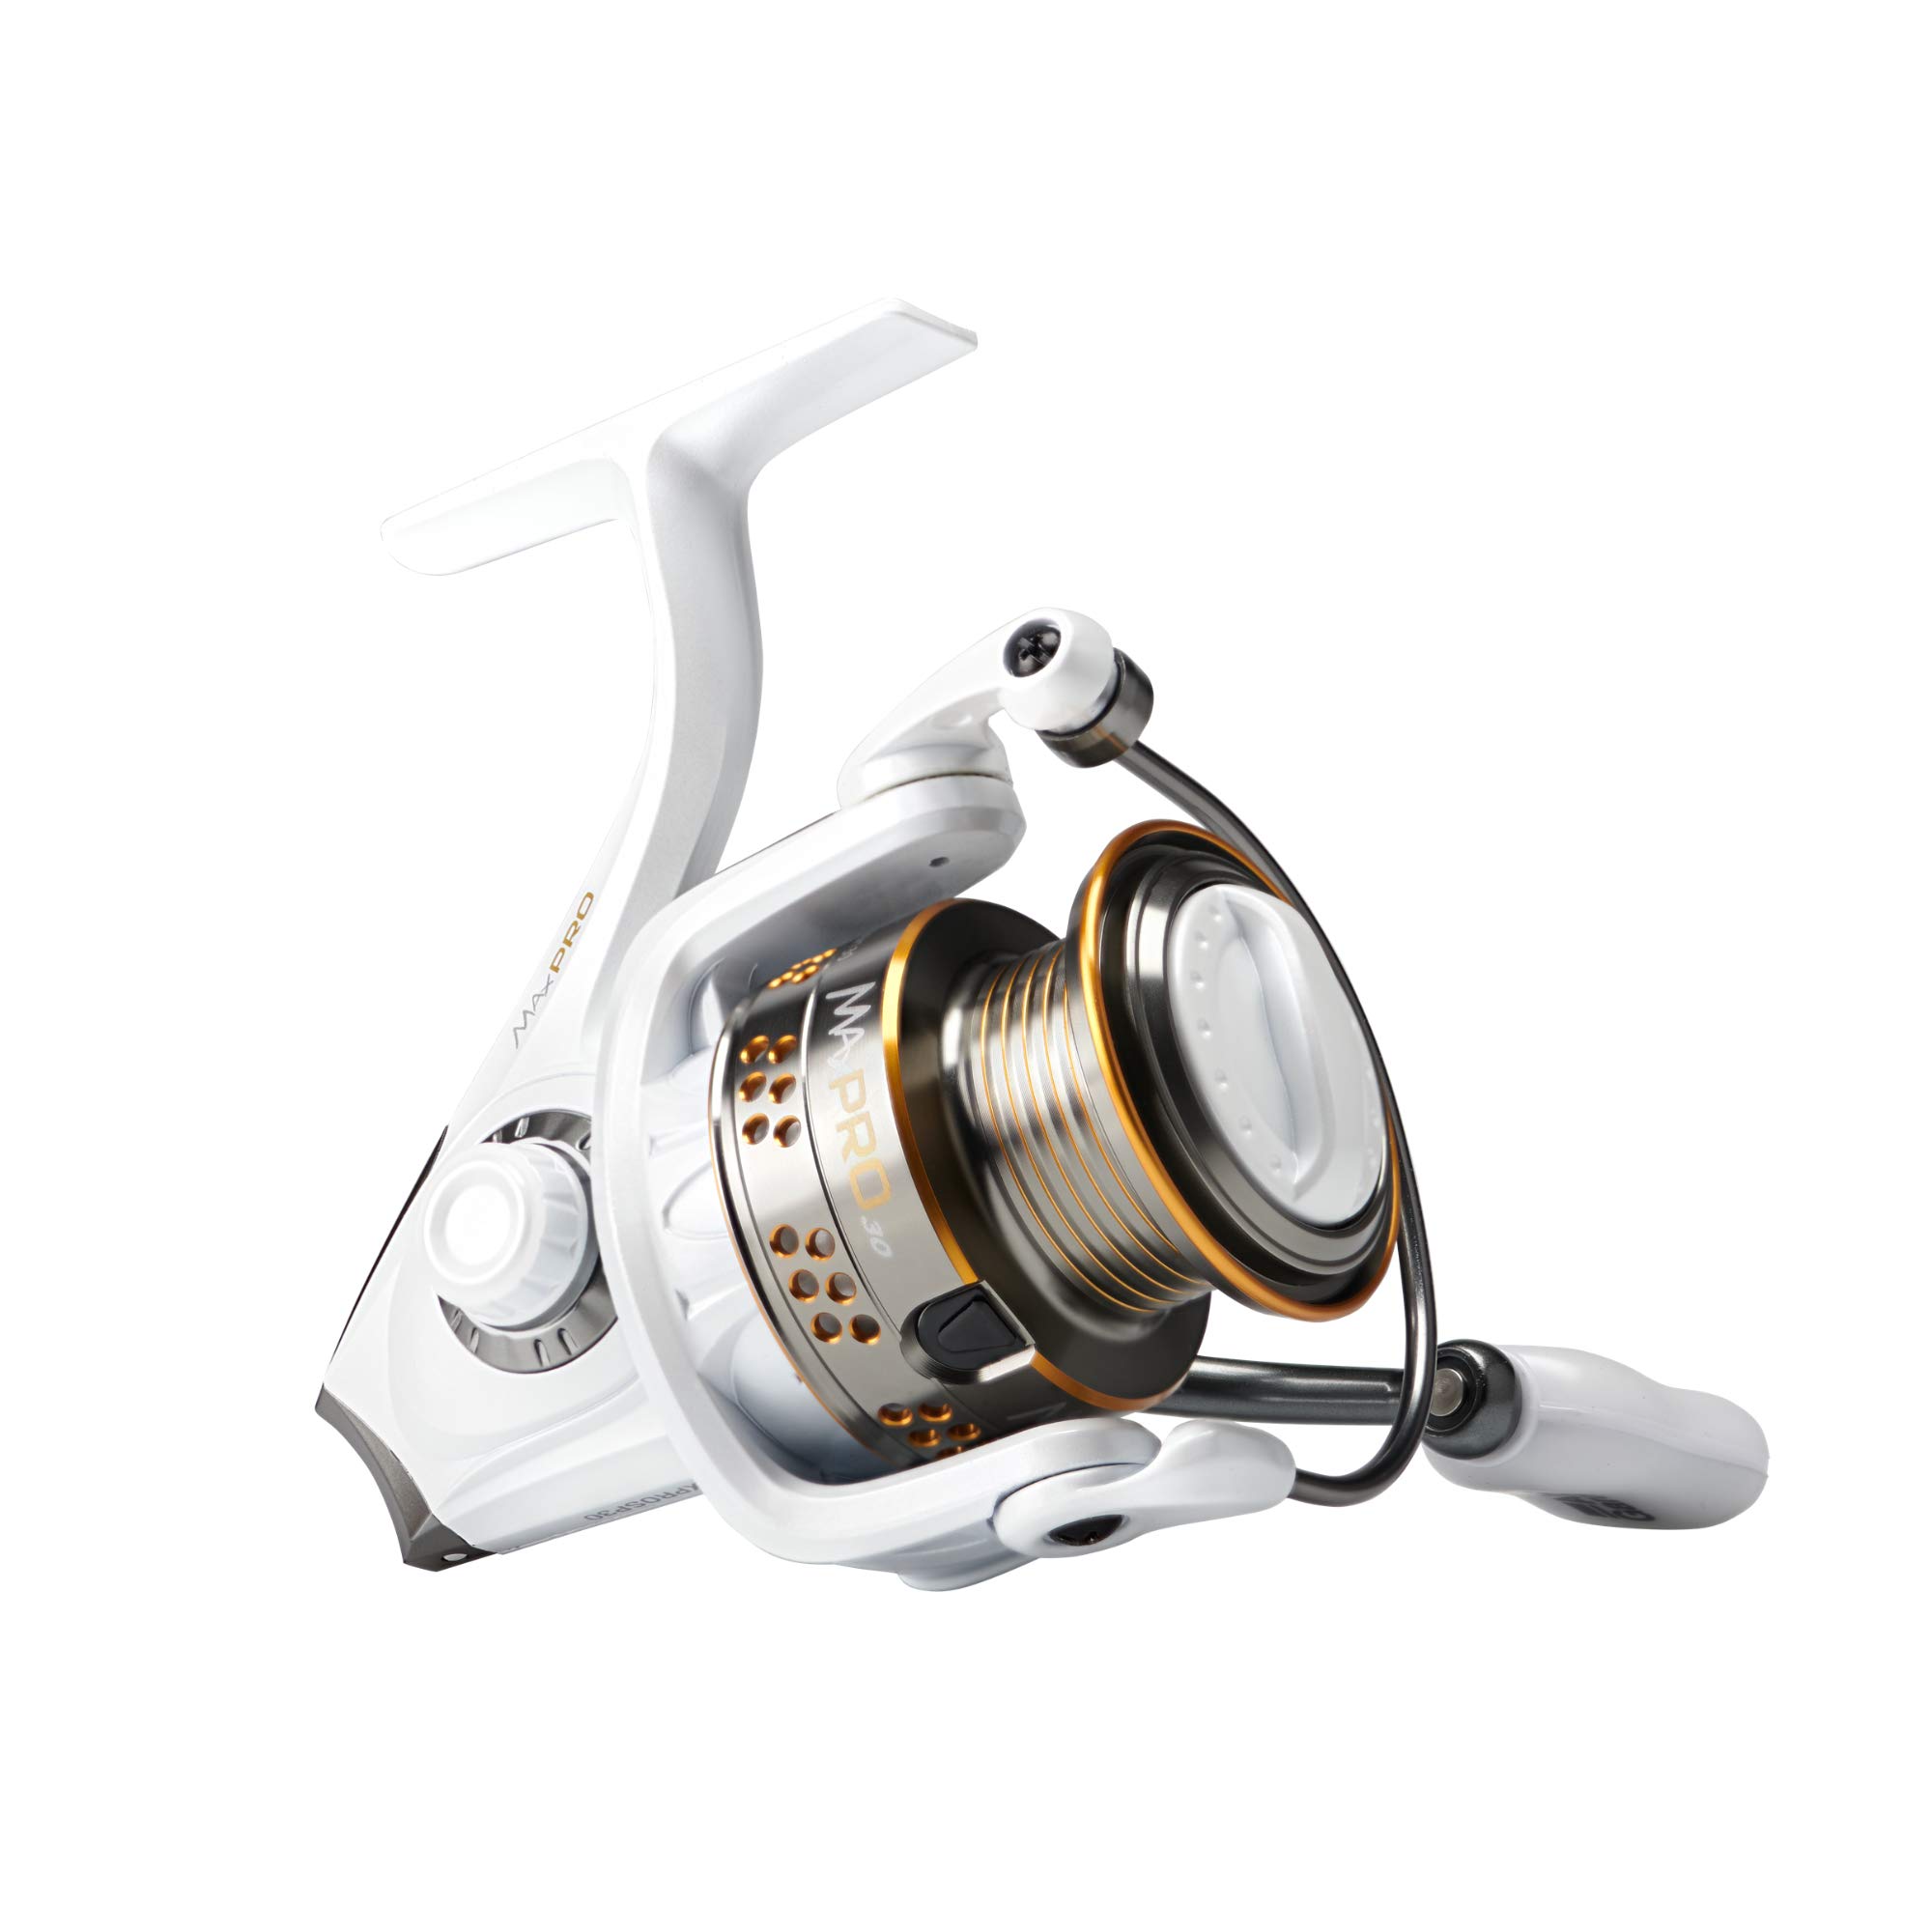 Abu Garcia Max Pro Spinning Reel, Size 60, Right/Left Handle Position,  Graphite Body, Corrosion-Resistant